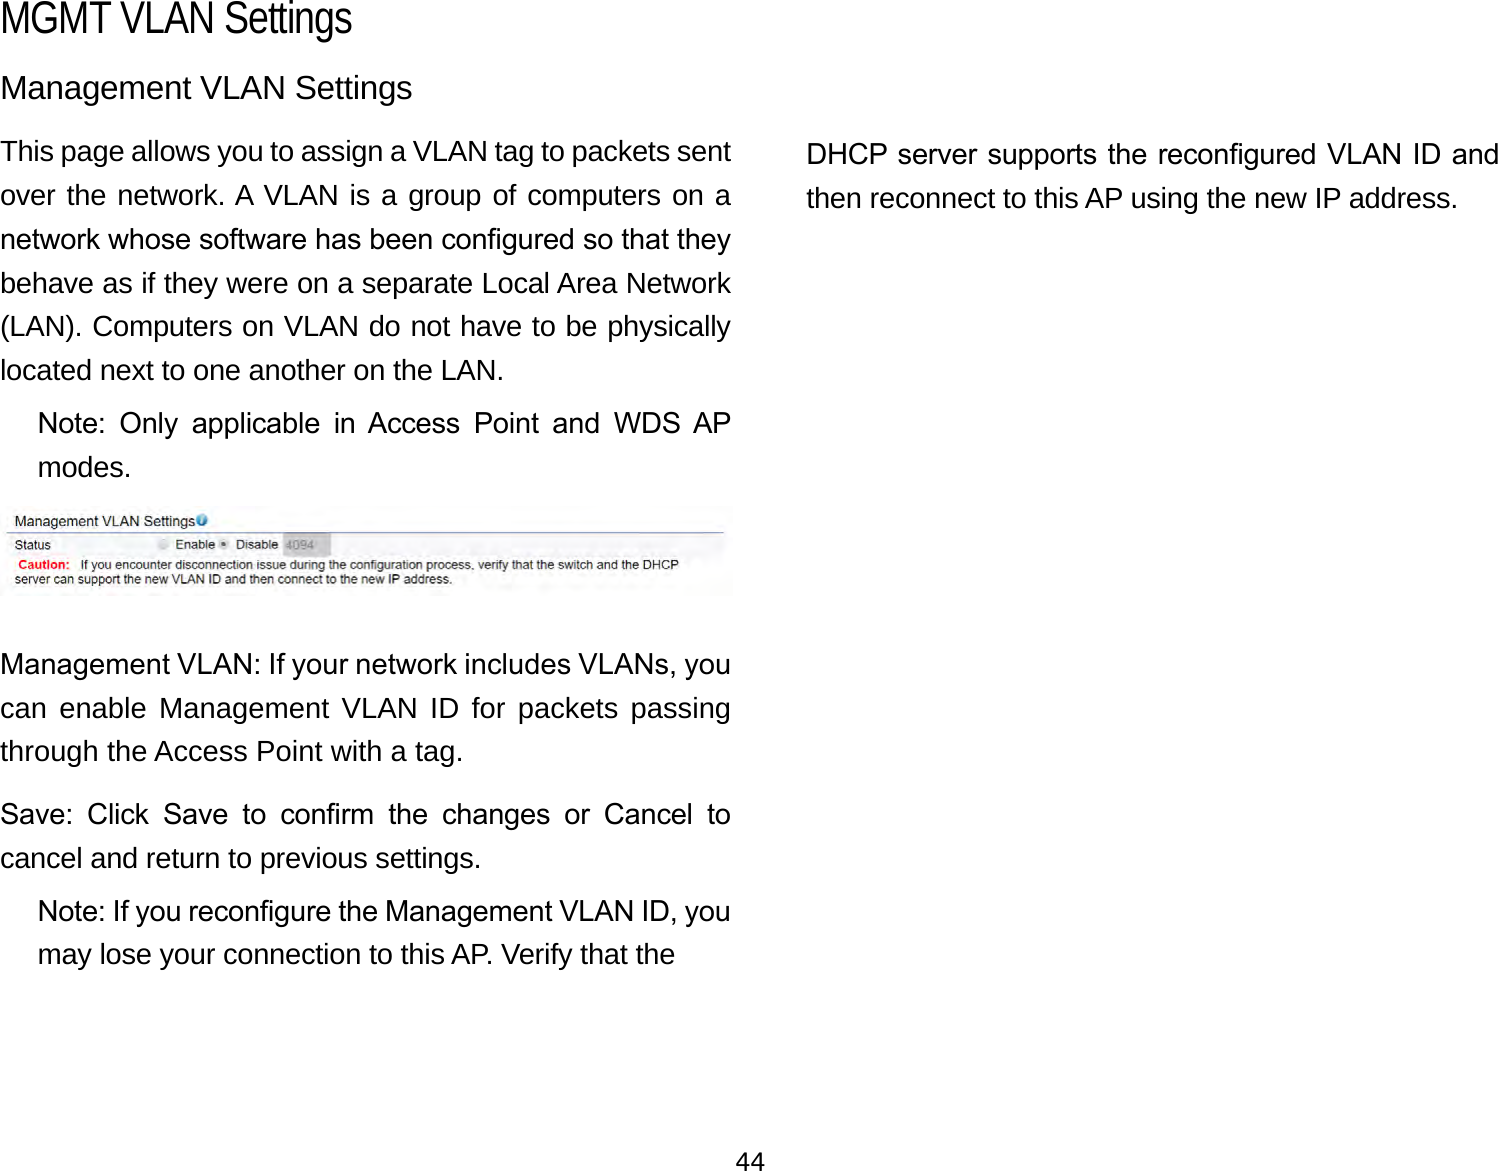 44Management VLAN SettingsThis page allows you to assign a VLAN tag to packets sent over the network. A VLAN is a group of computers on a network whose software has been congured so that they behave as if they were on a separate Local Area Network (LAN). Computers on VLAN do not have to be physically located next to one another on the LAN.Note:  Only  applicable  in  Access  Point  and  WDS  AP modes.Management VLAN: If your network includes VLANs, you can enable Management VLAN ID for packets passing through the Access Point with a tag. Save:  Click  Save  to  conrm  the  changes  or  Cancel  to cancel and return to previous settings.Note: If you recongure the Management VLAN ID, you may lose your connection to this AP. Verify that the   DHCP server supports the recongured VLAN ID and then reconnect to this AP using the new IP address. MGMT VLAN Settings